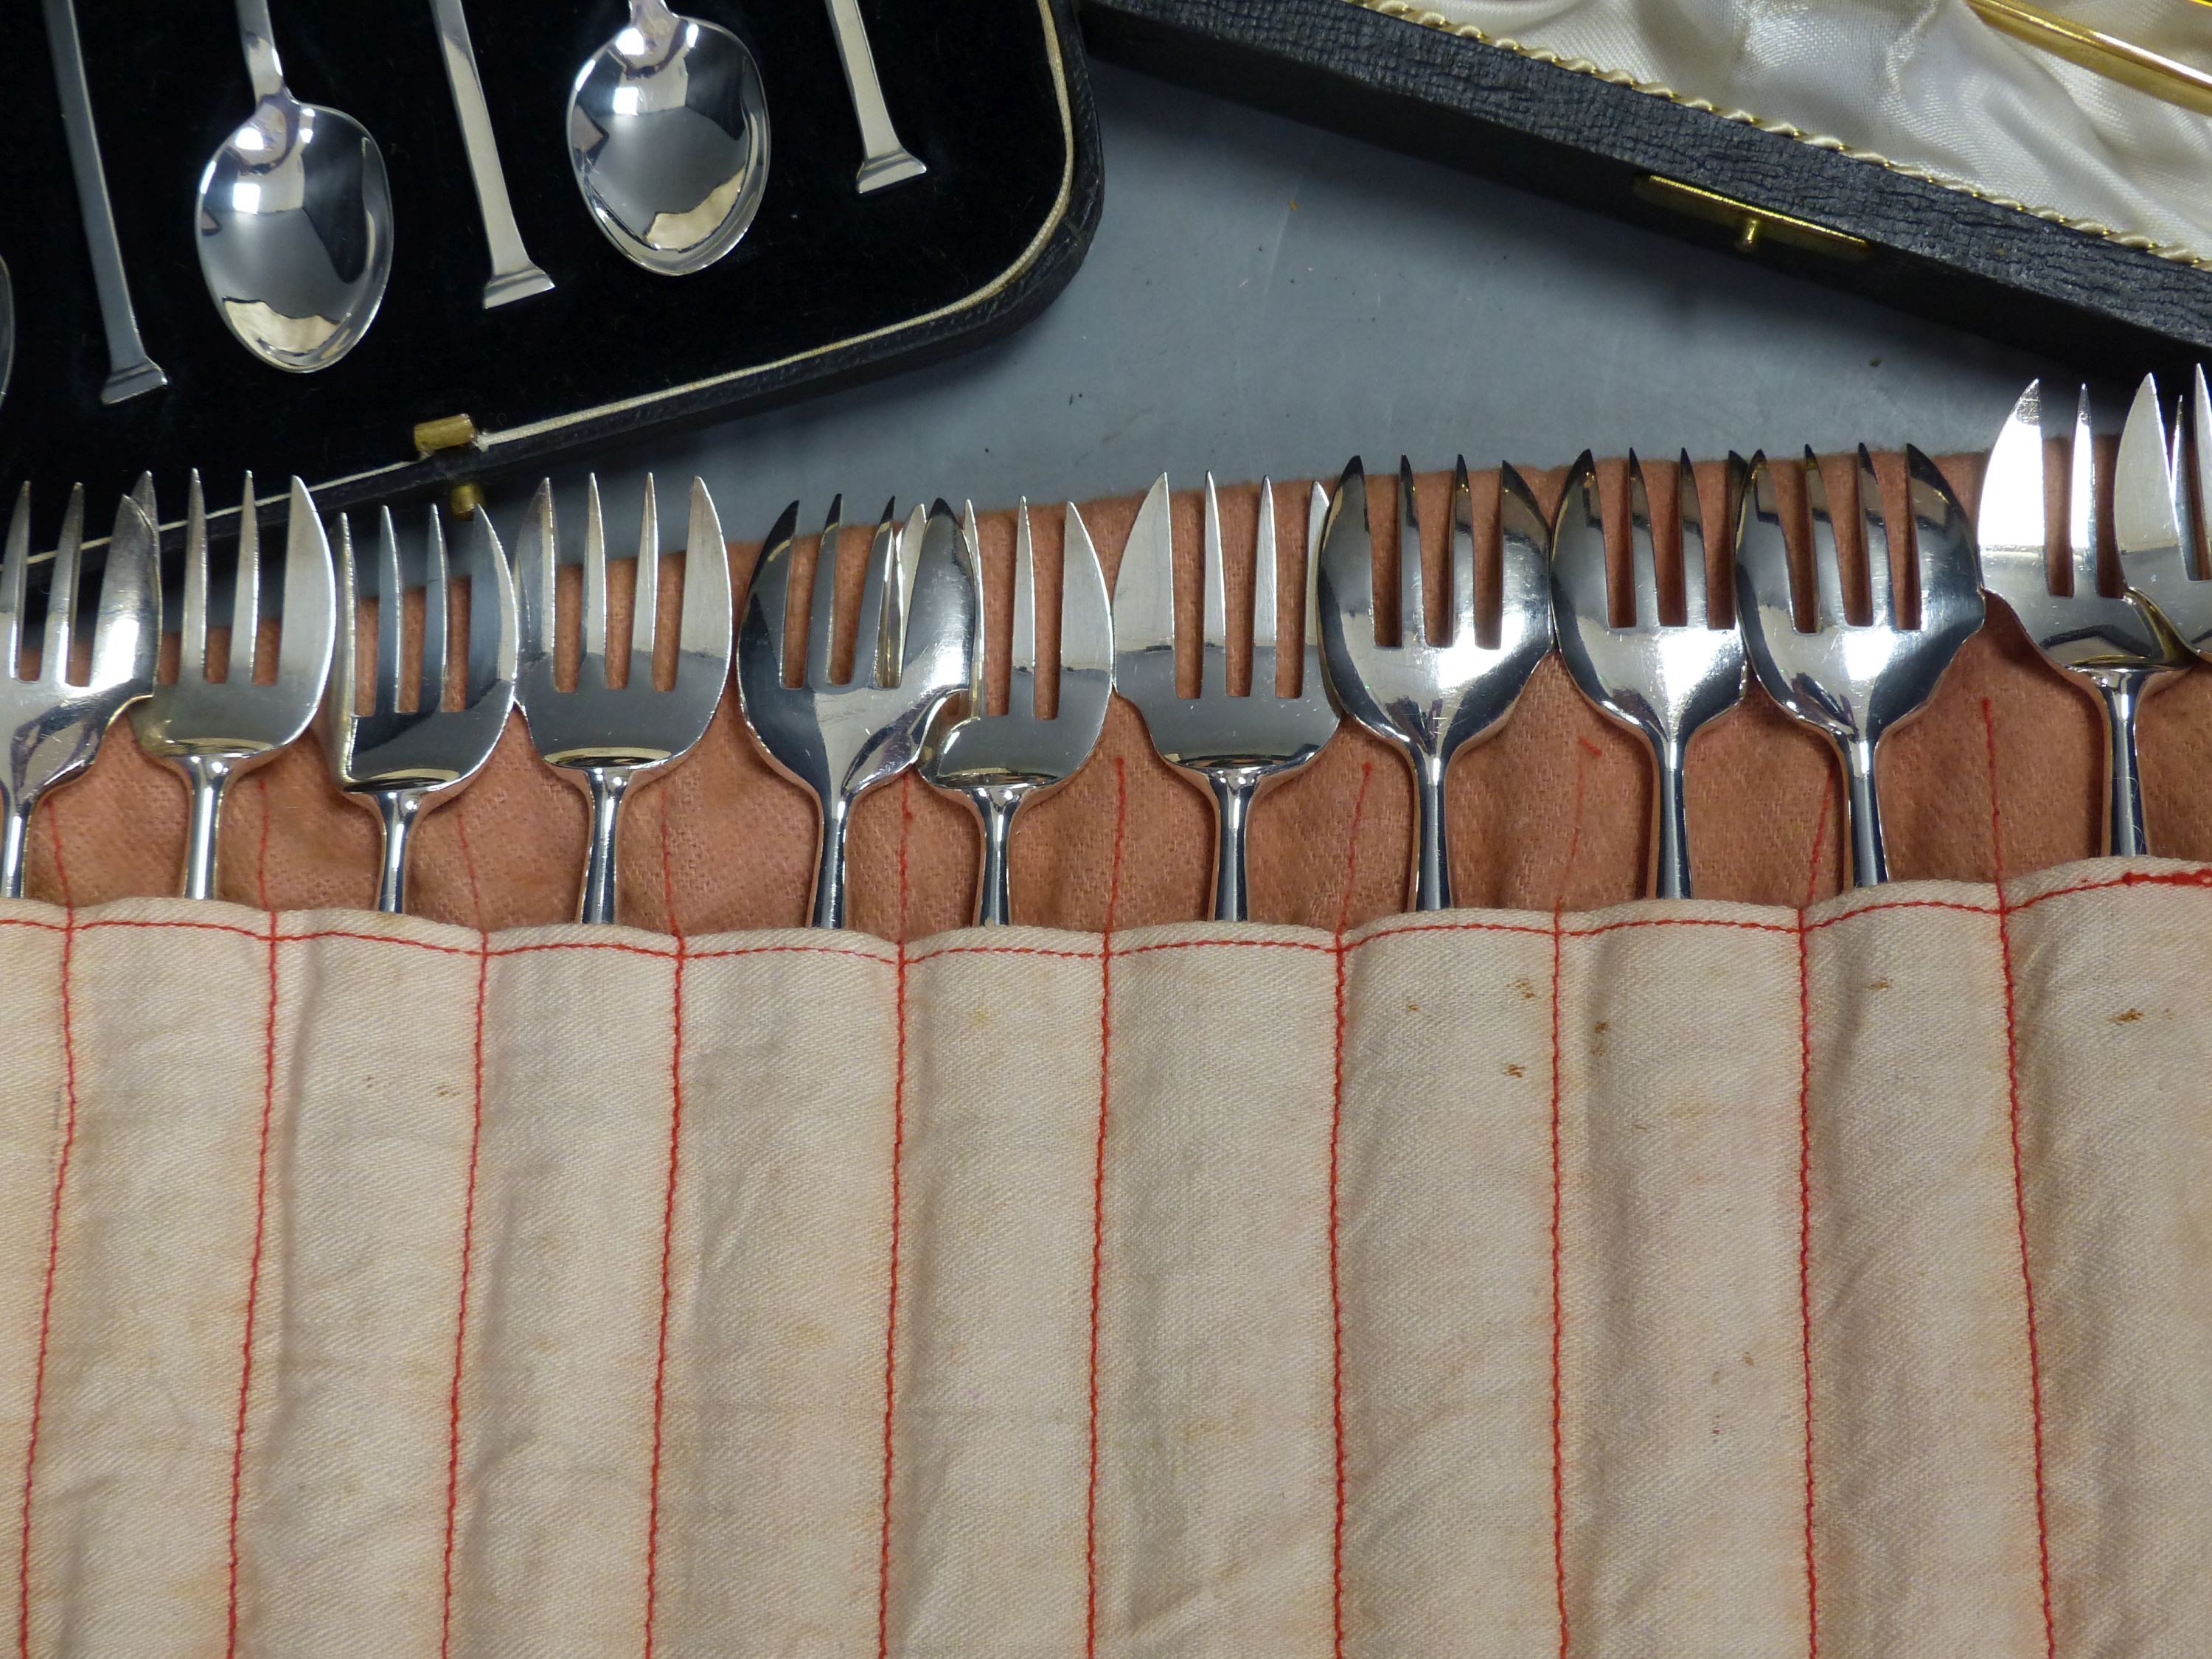 A set of twelve Christofle forks, a cased set of English coffee spoons and a set of Solingen gold-plated spoons.